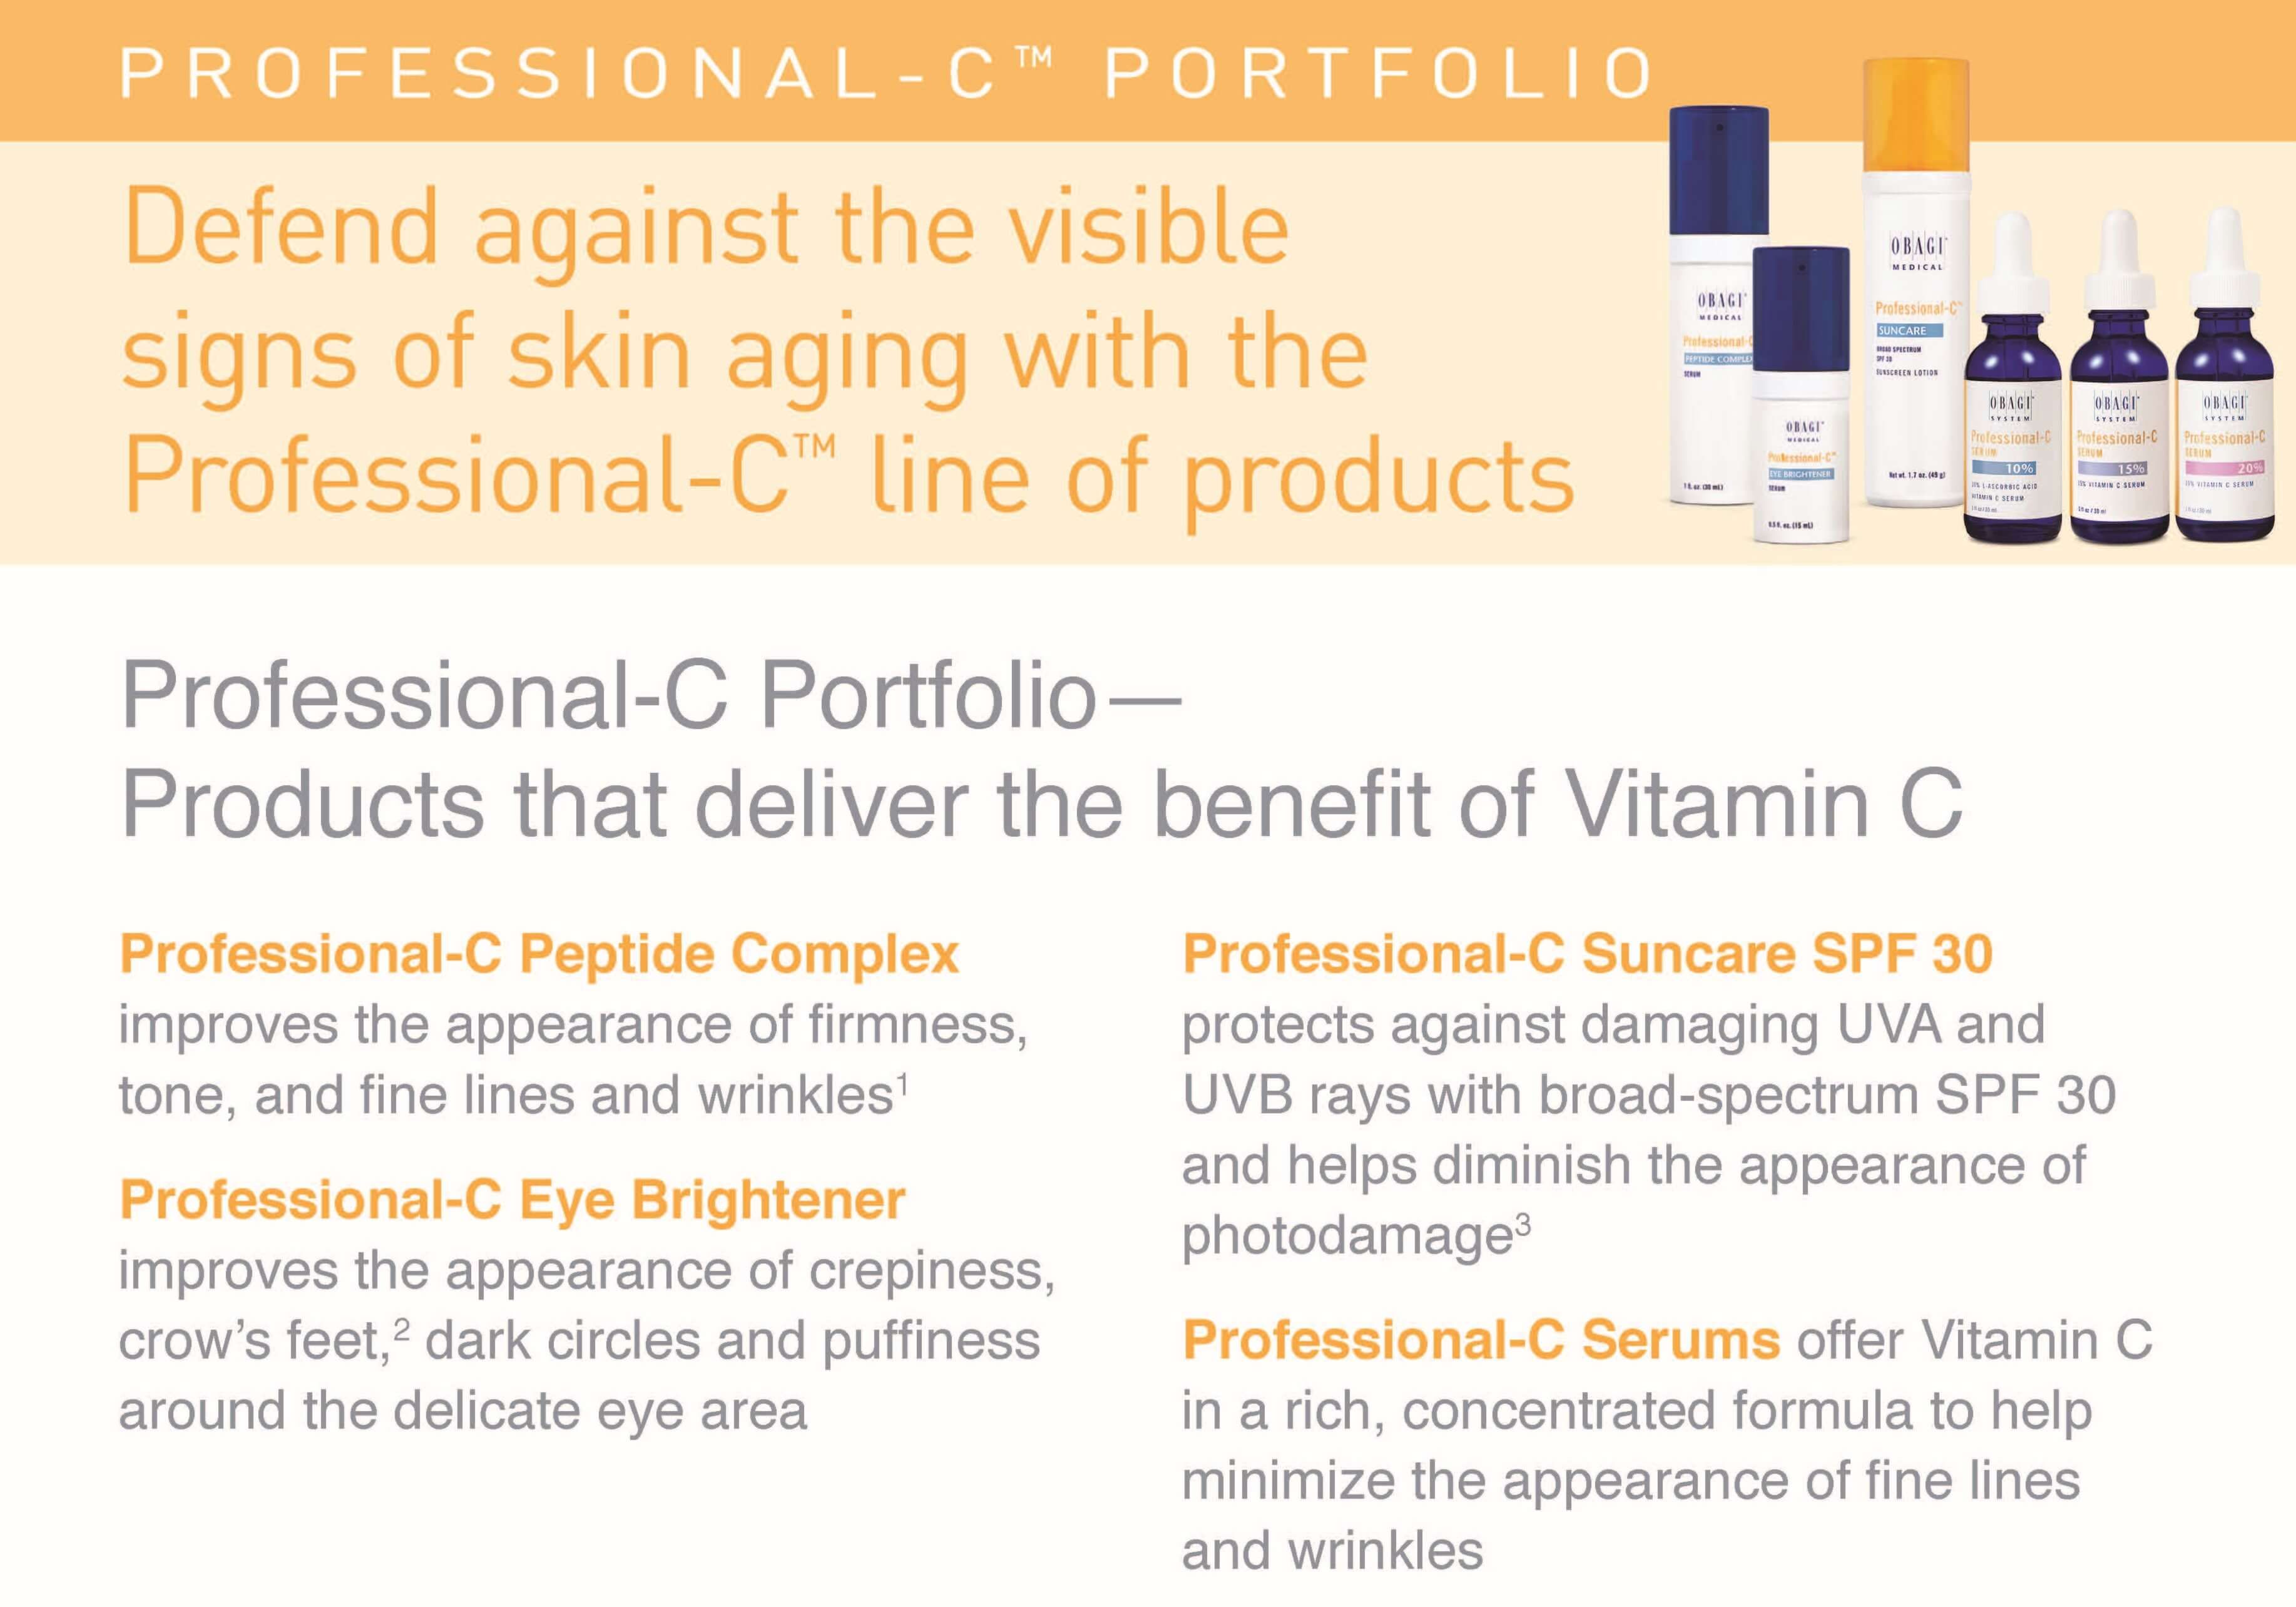 Obagi Professional C-Serums protect skin and minimize fine lines and wrinkles